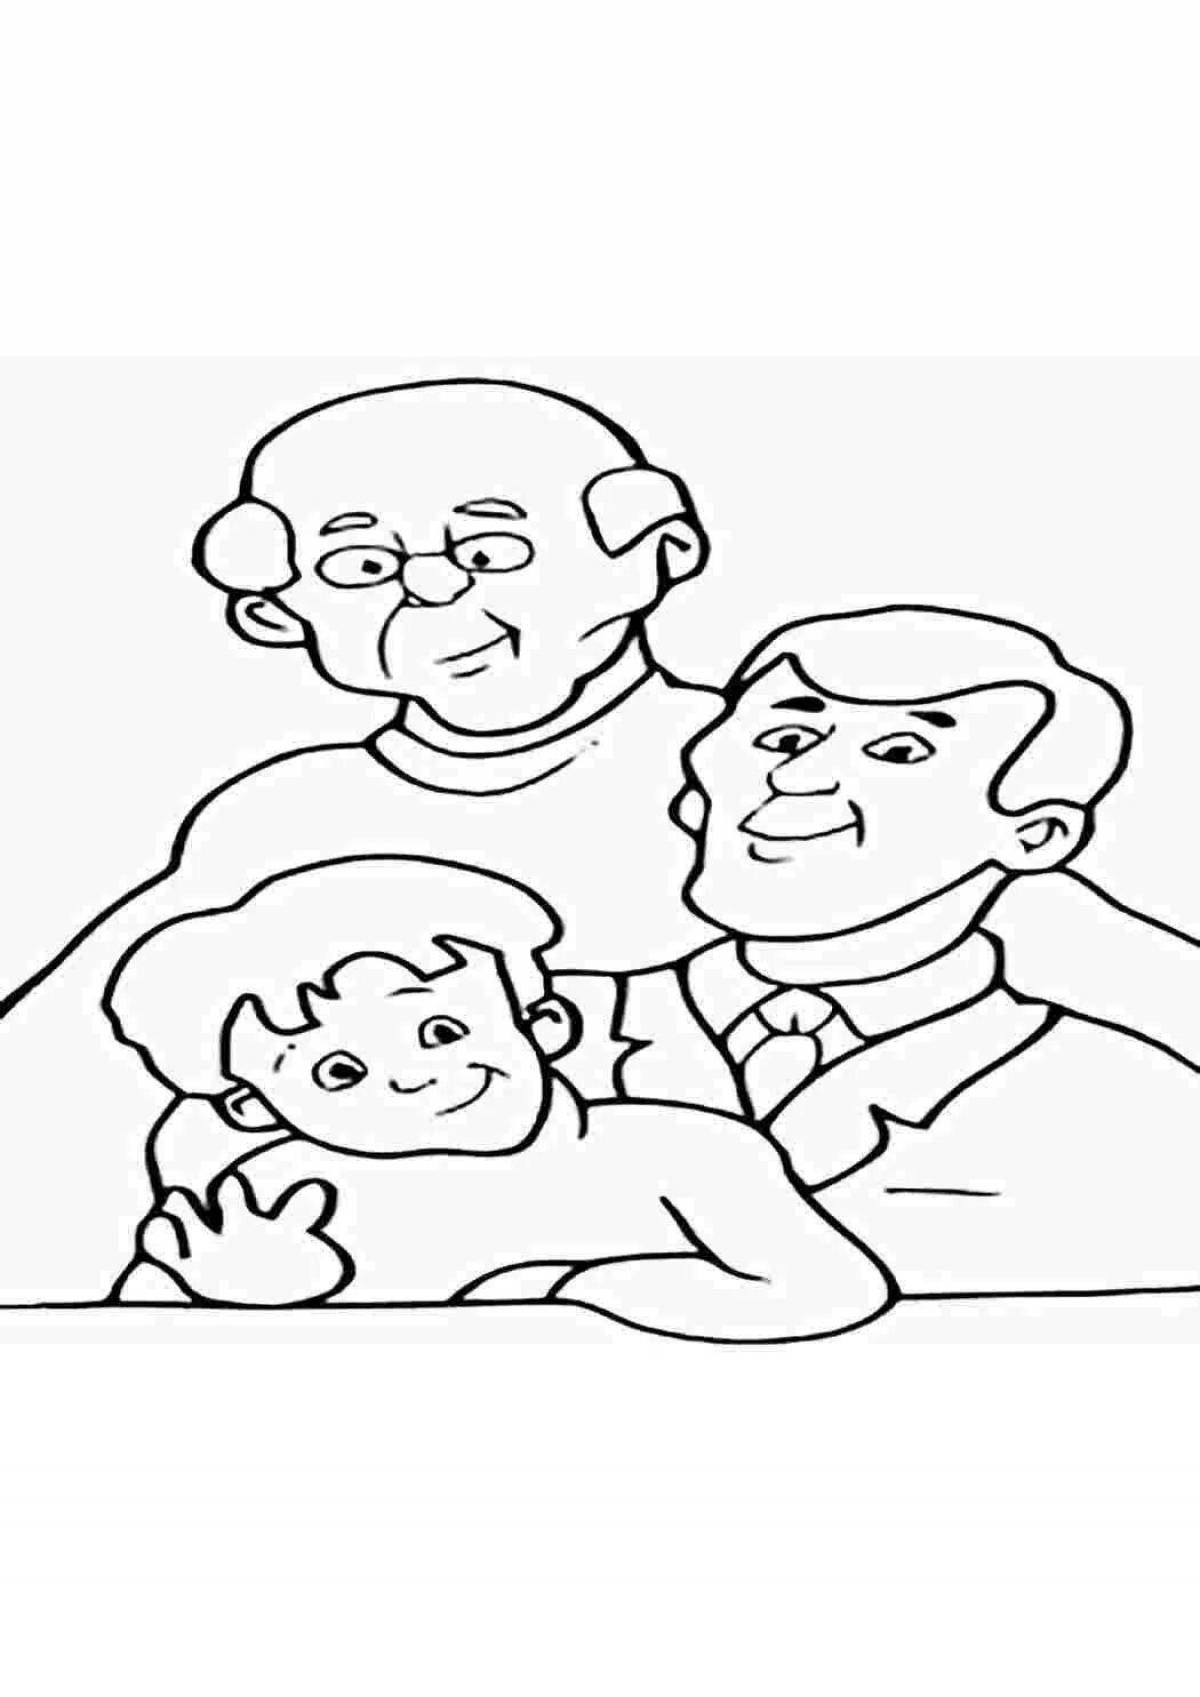 Funny coloring pages of grandparents for kids